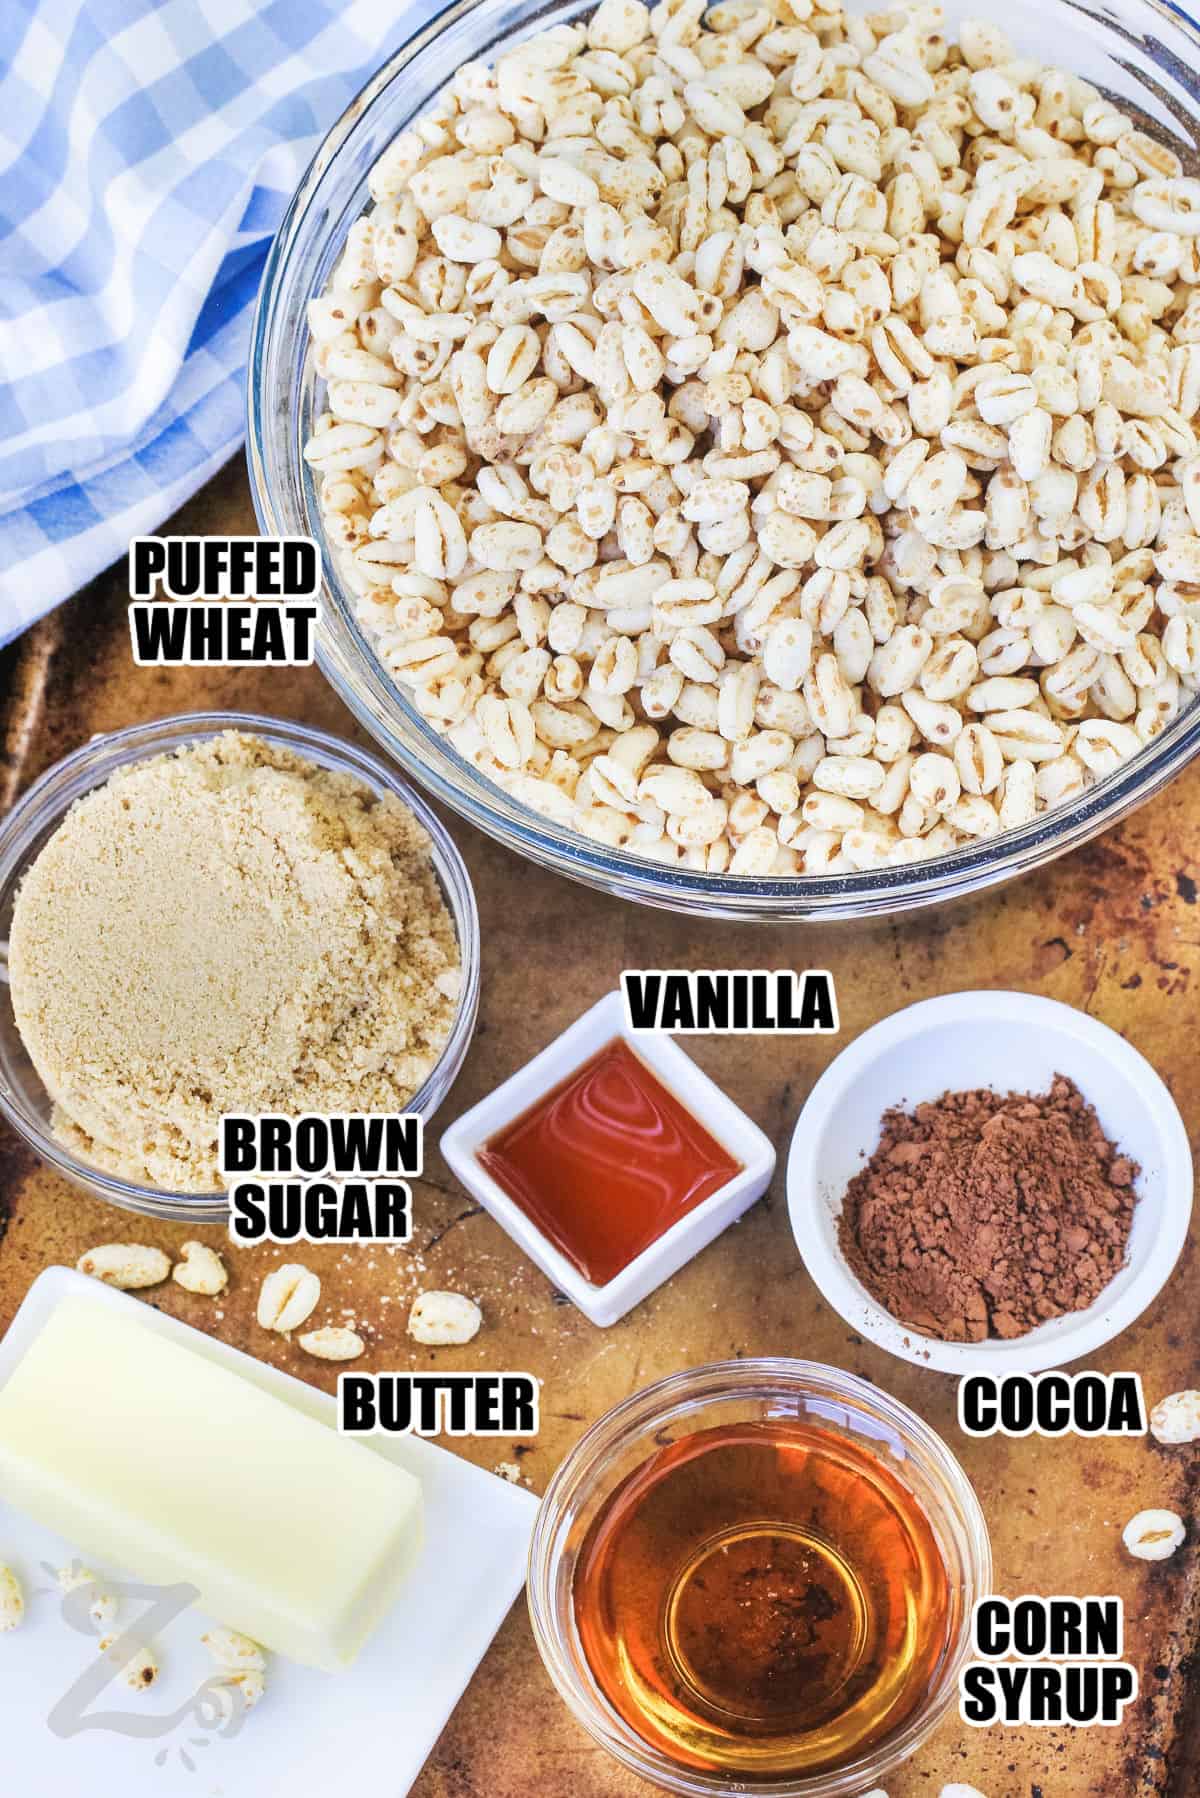 Ingredients to make puffed wheat squares labeled